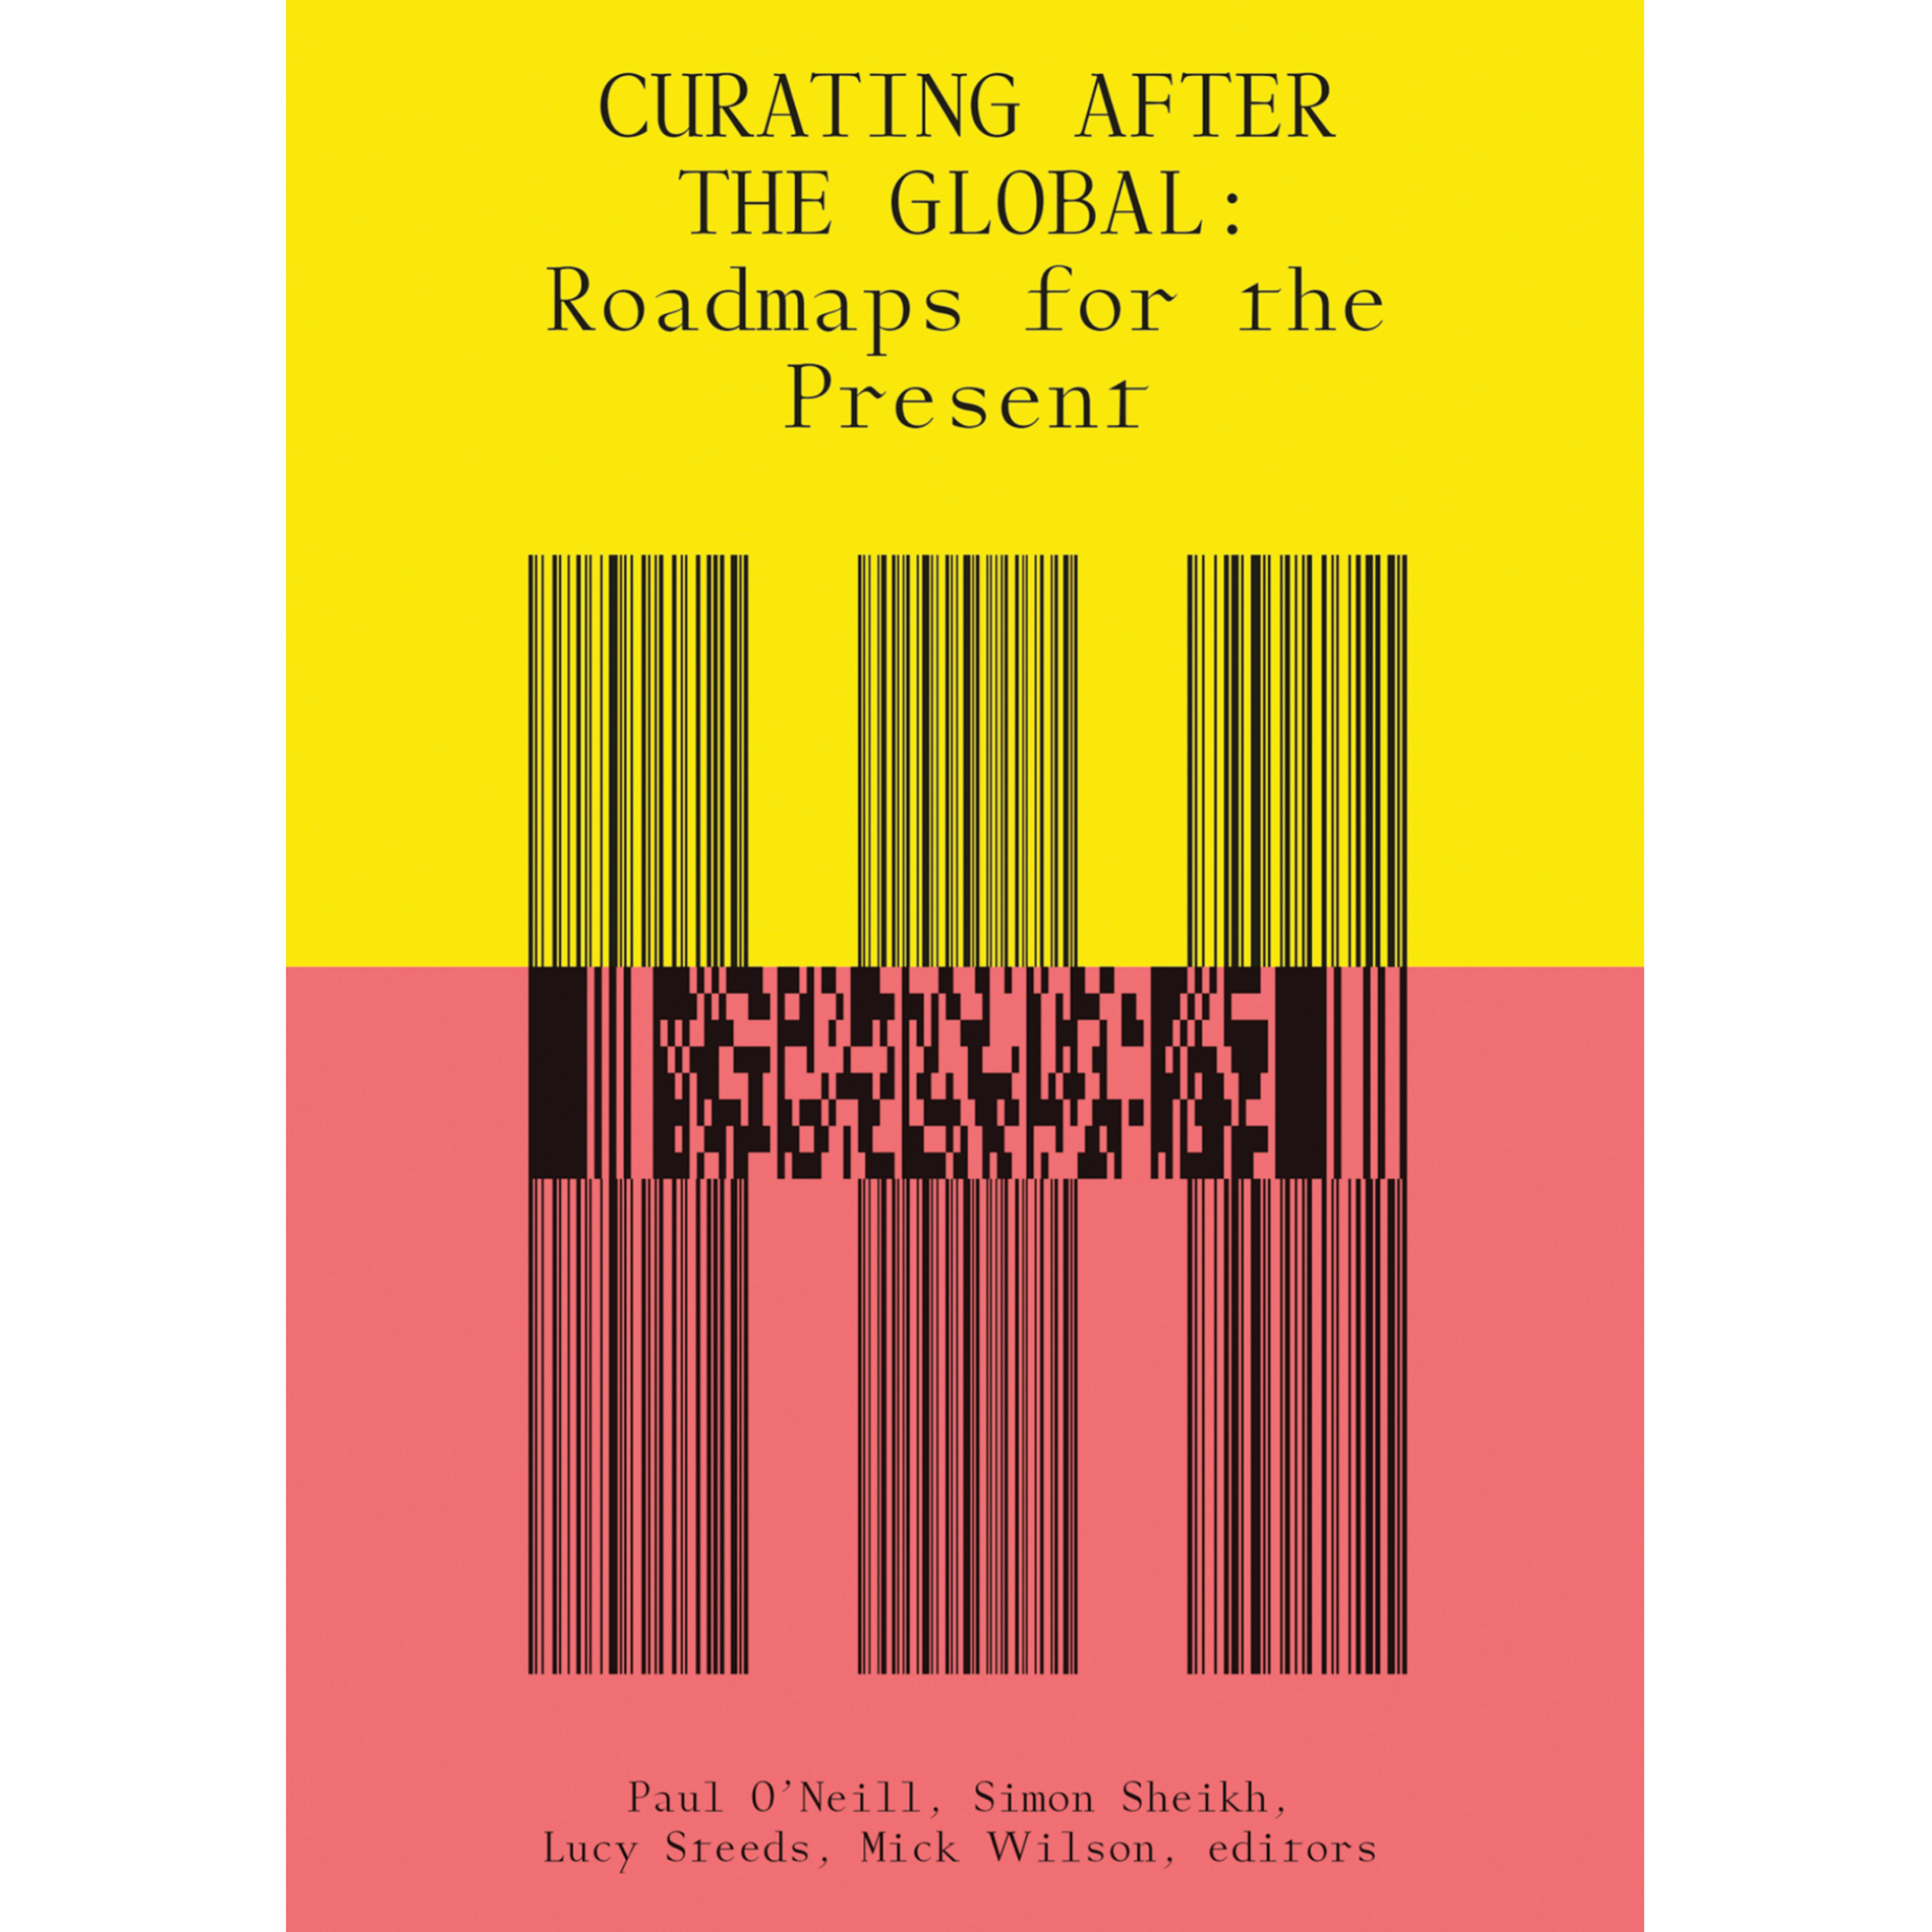 Curating After the Global: Roadmaps for the Present